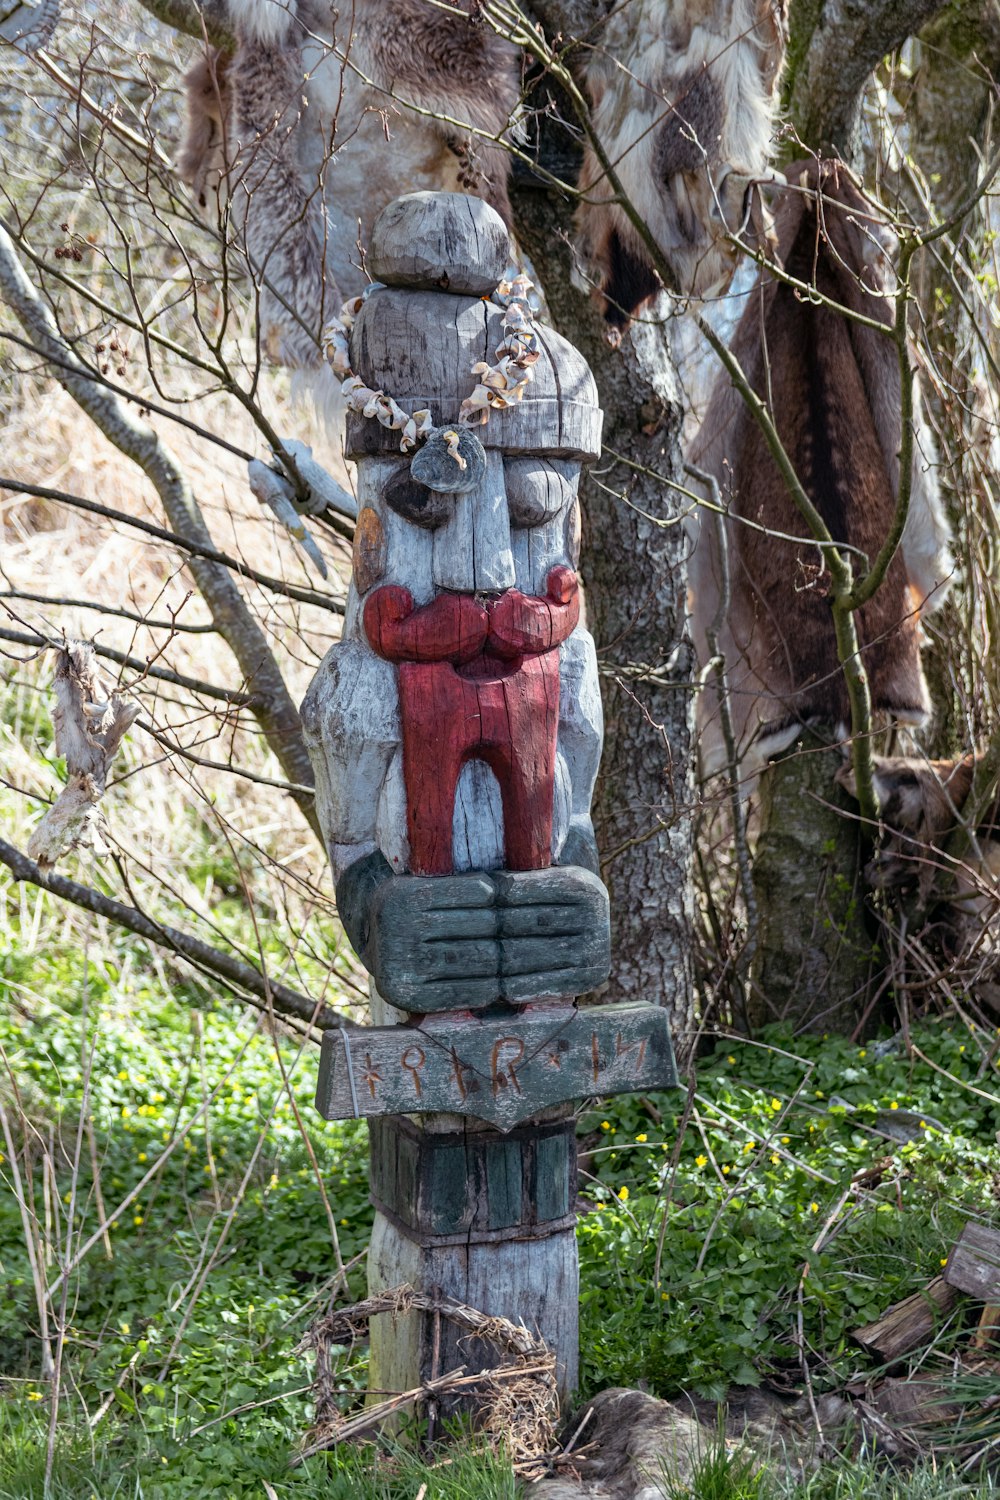 a statue of a person sitting on top of a wooden pole